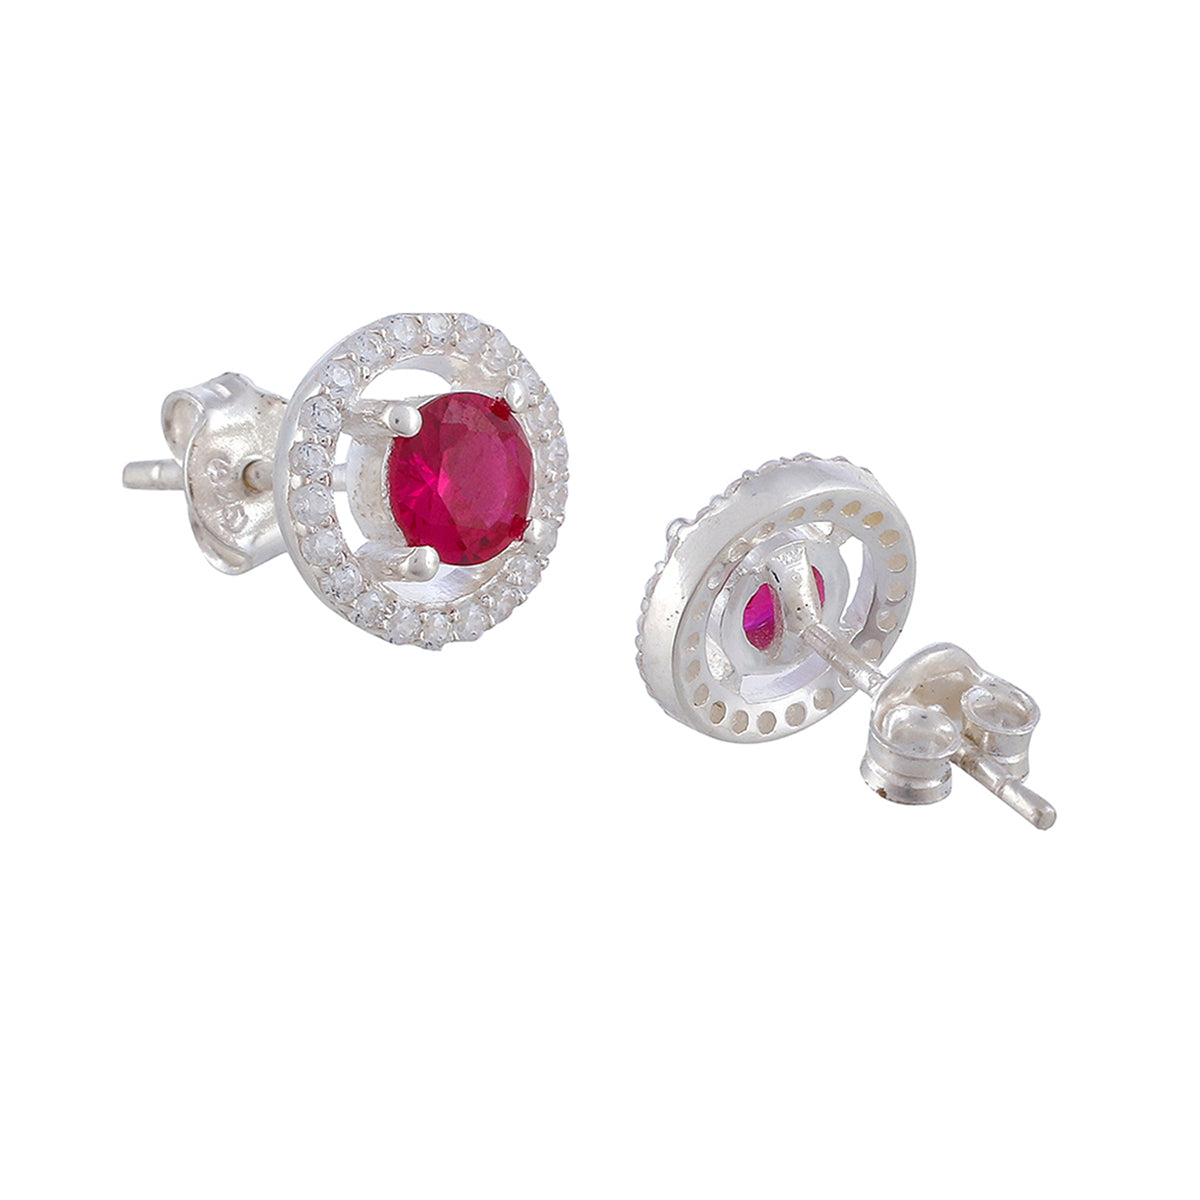 925 Sterling Silver Round Shaped Stud Earrings Made With Red Stone